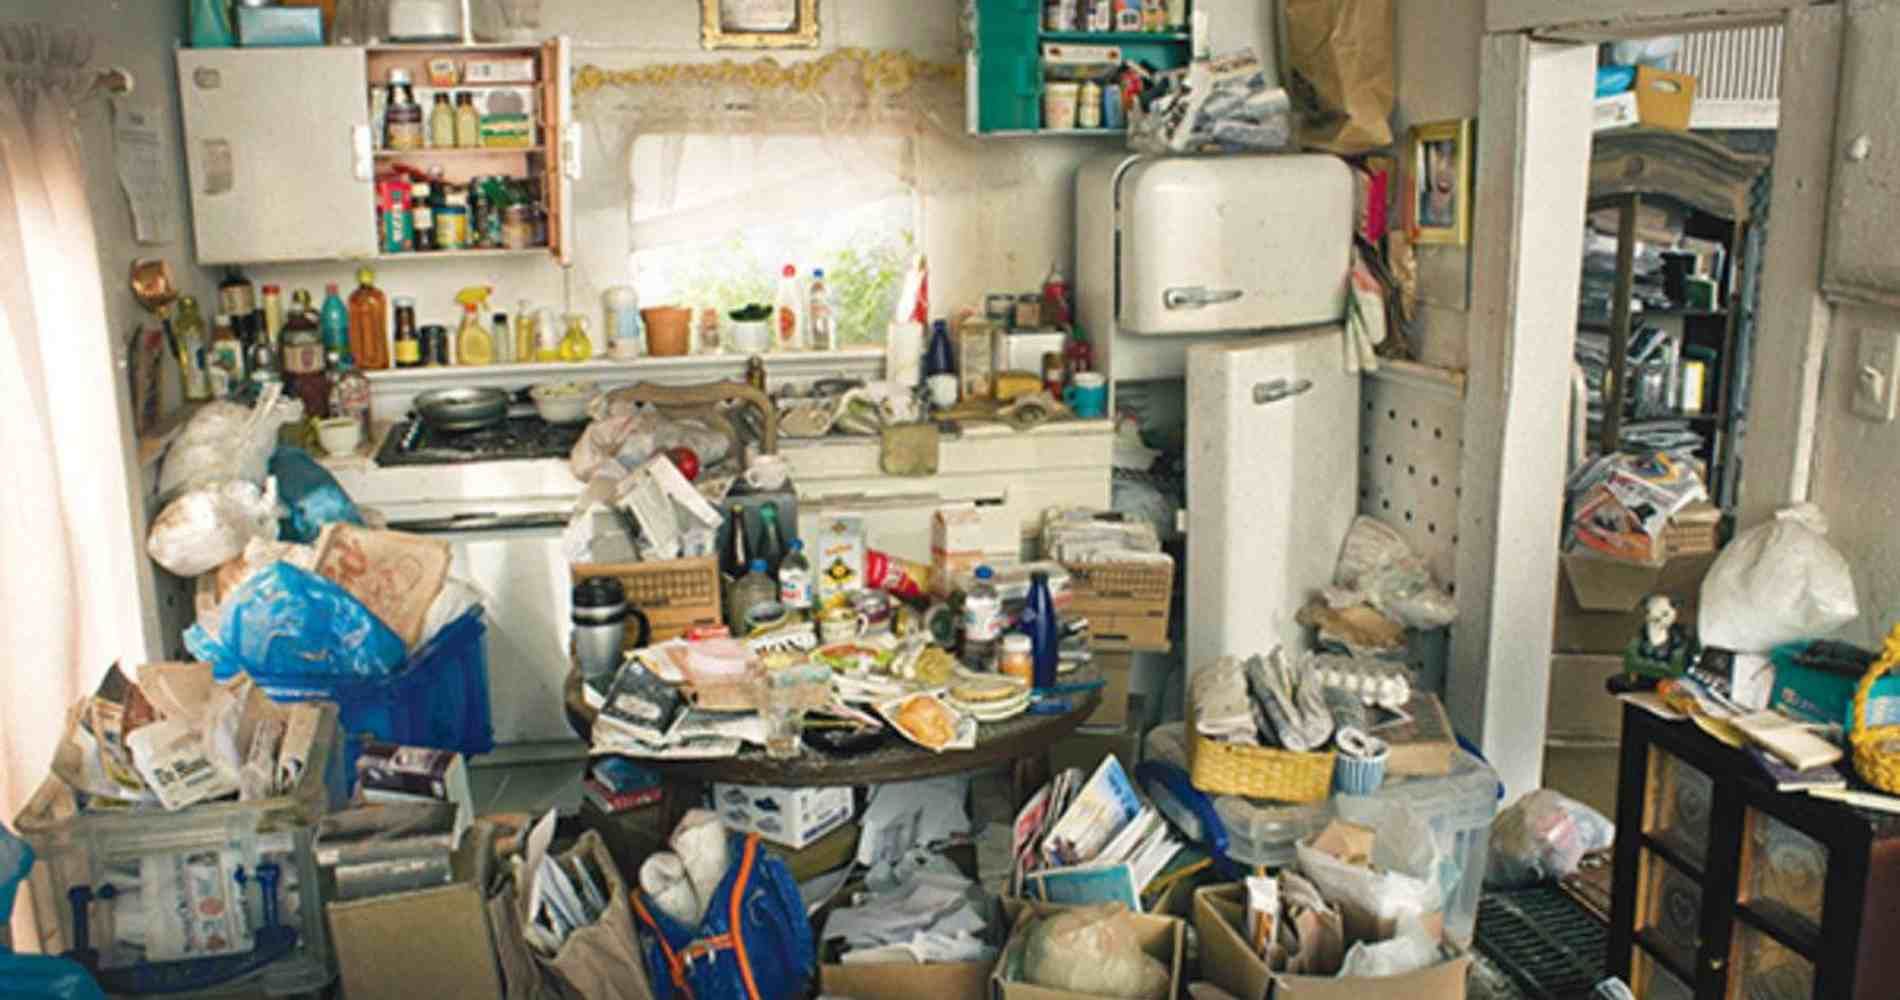 #1 for Hoarding Cleanup in Queen Creek, AZ with Over 1200 5-Star Reviews!